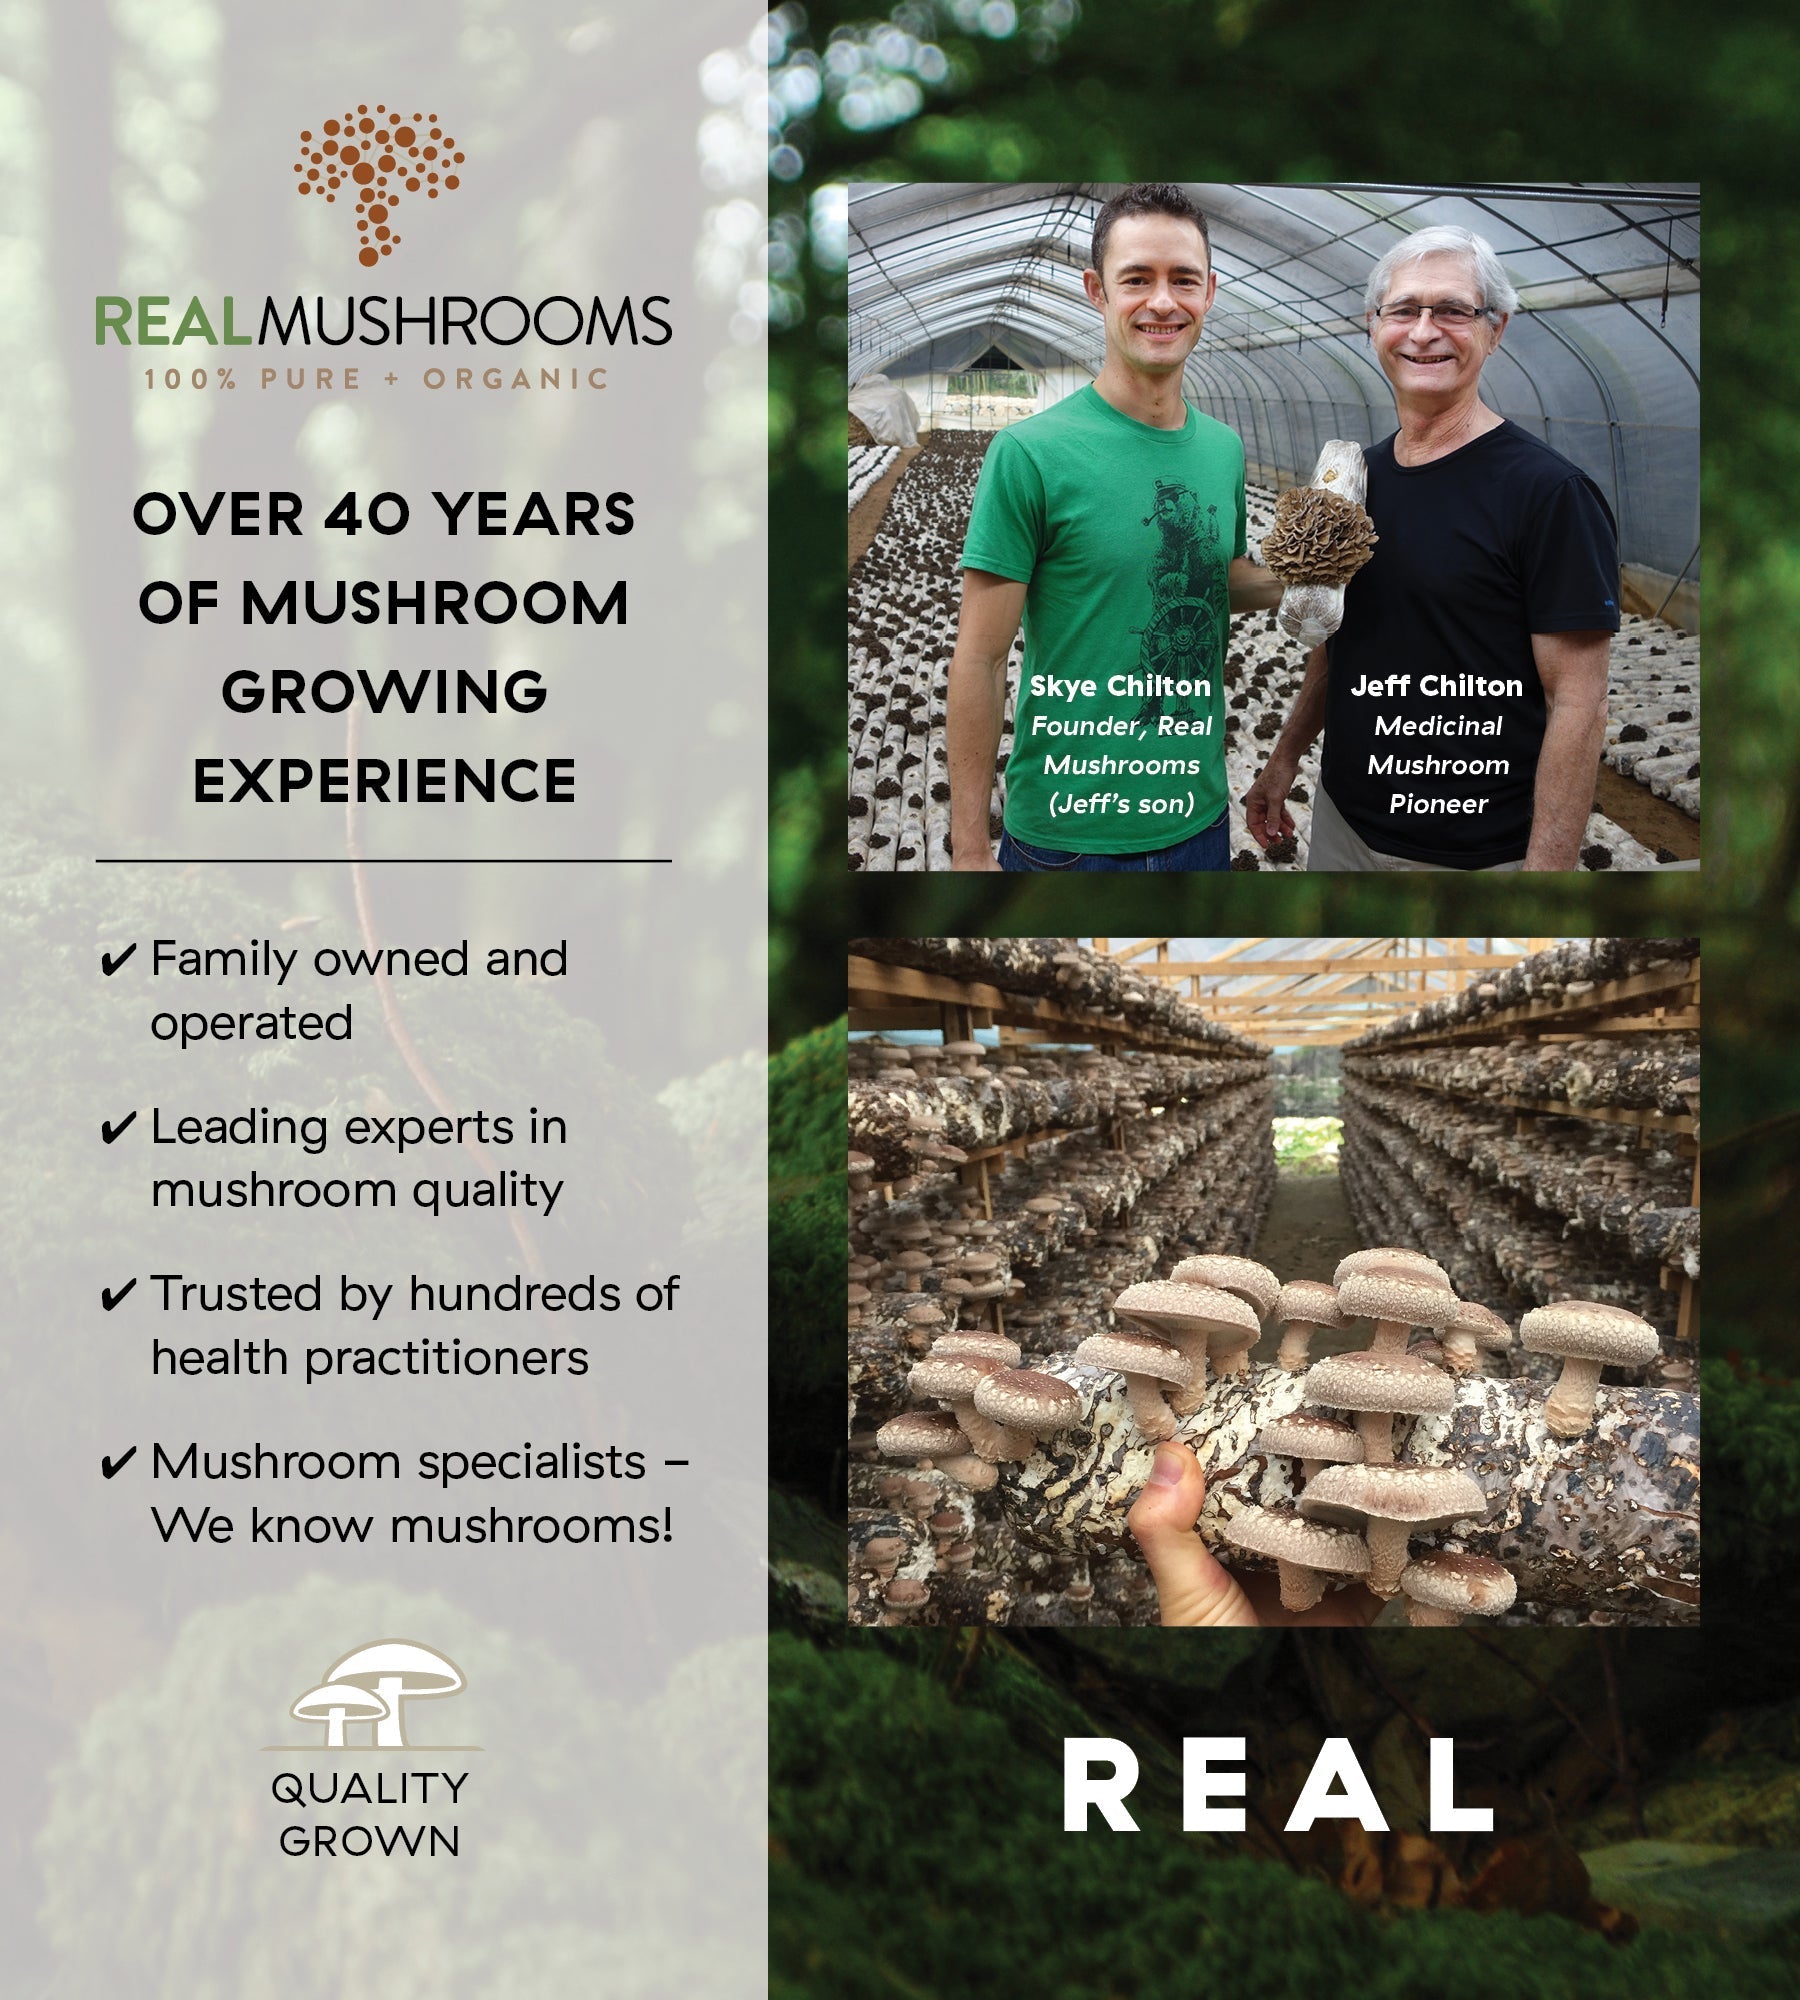 Real Mushrooms Organic Lion's Mane Extract Capsules - Multiverse